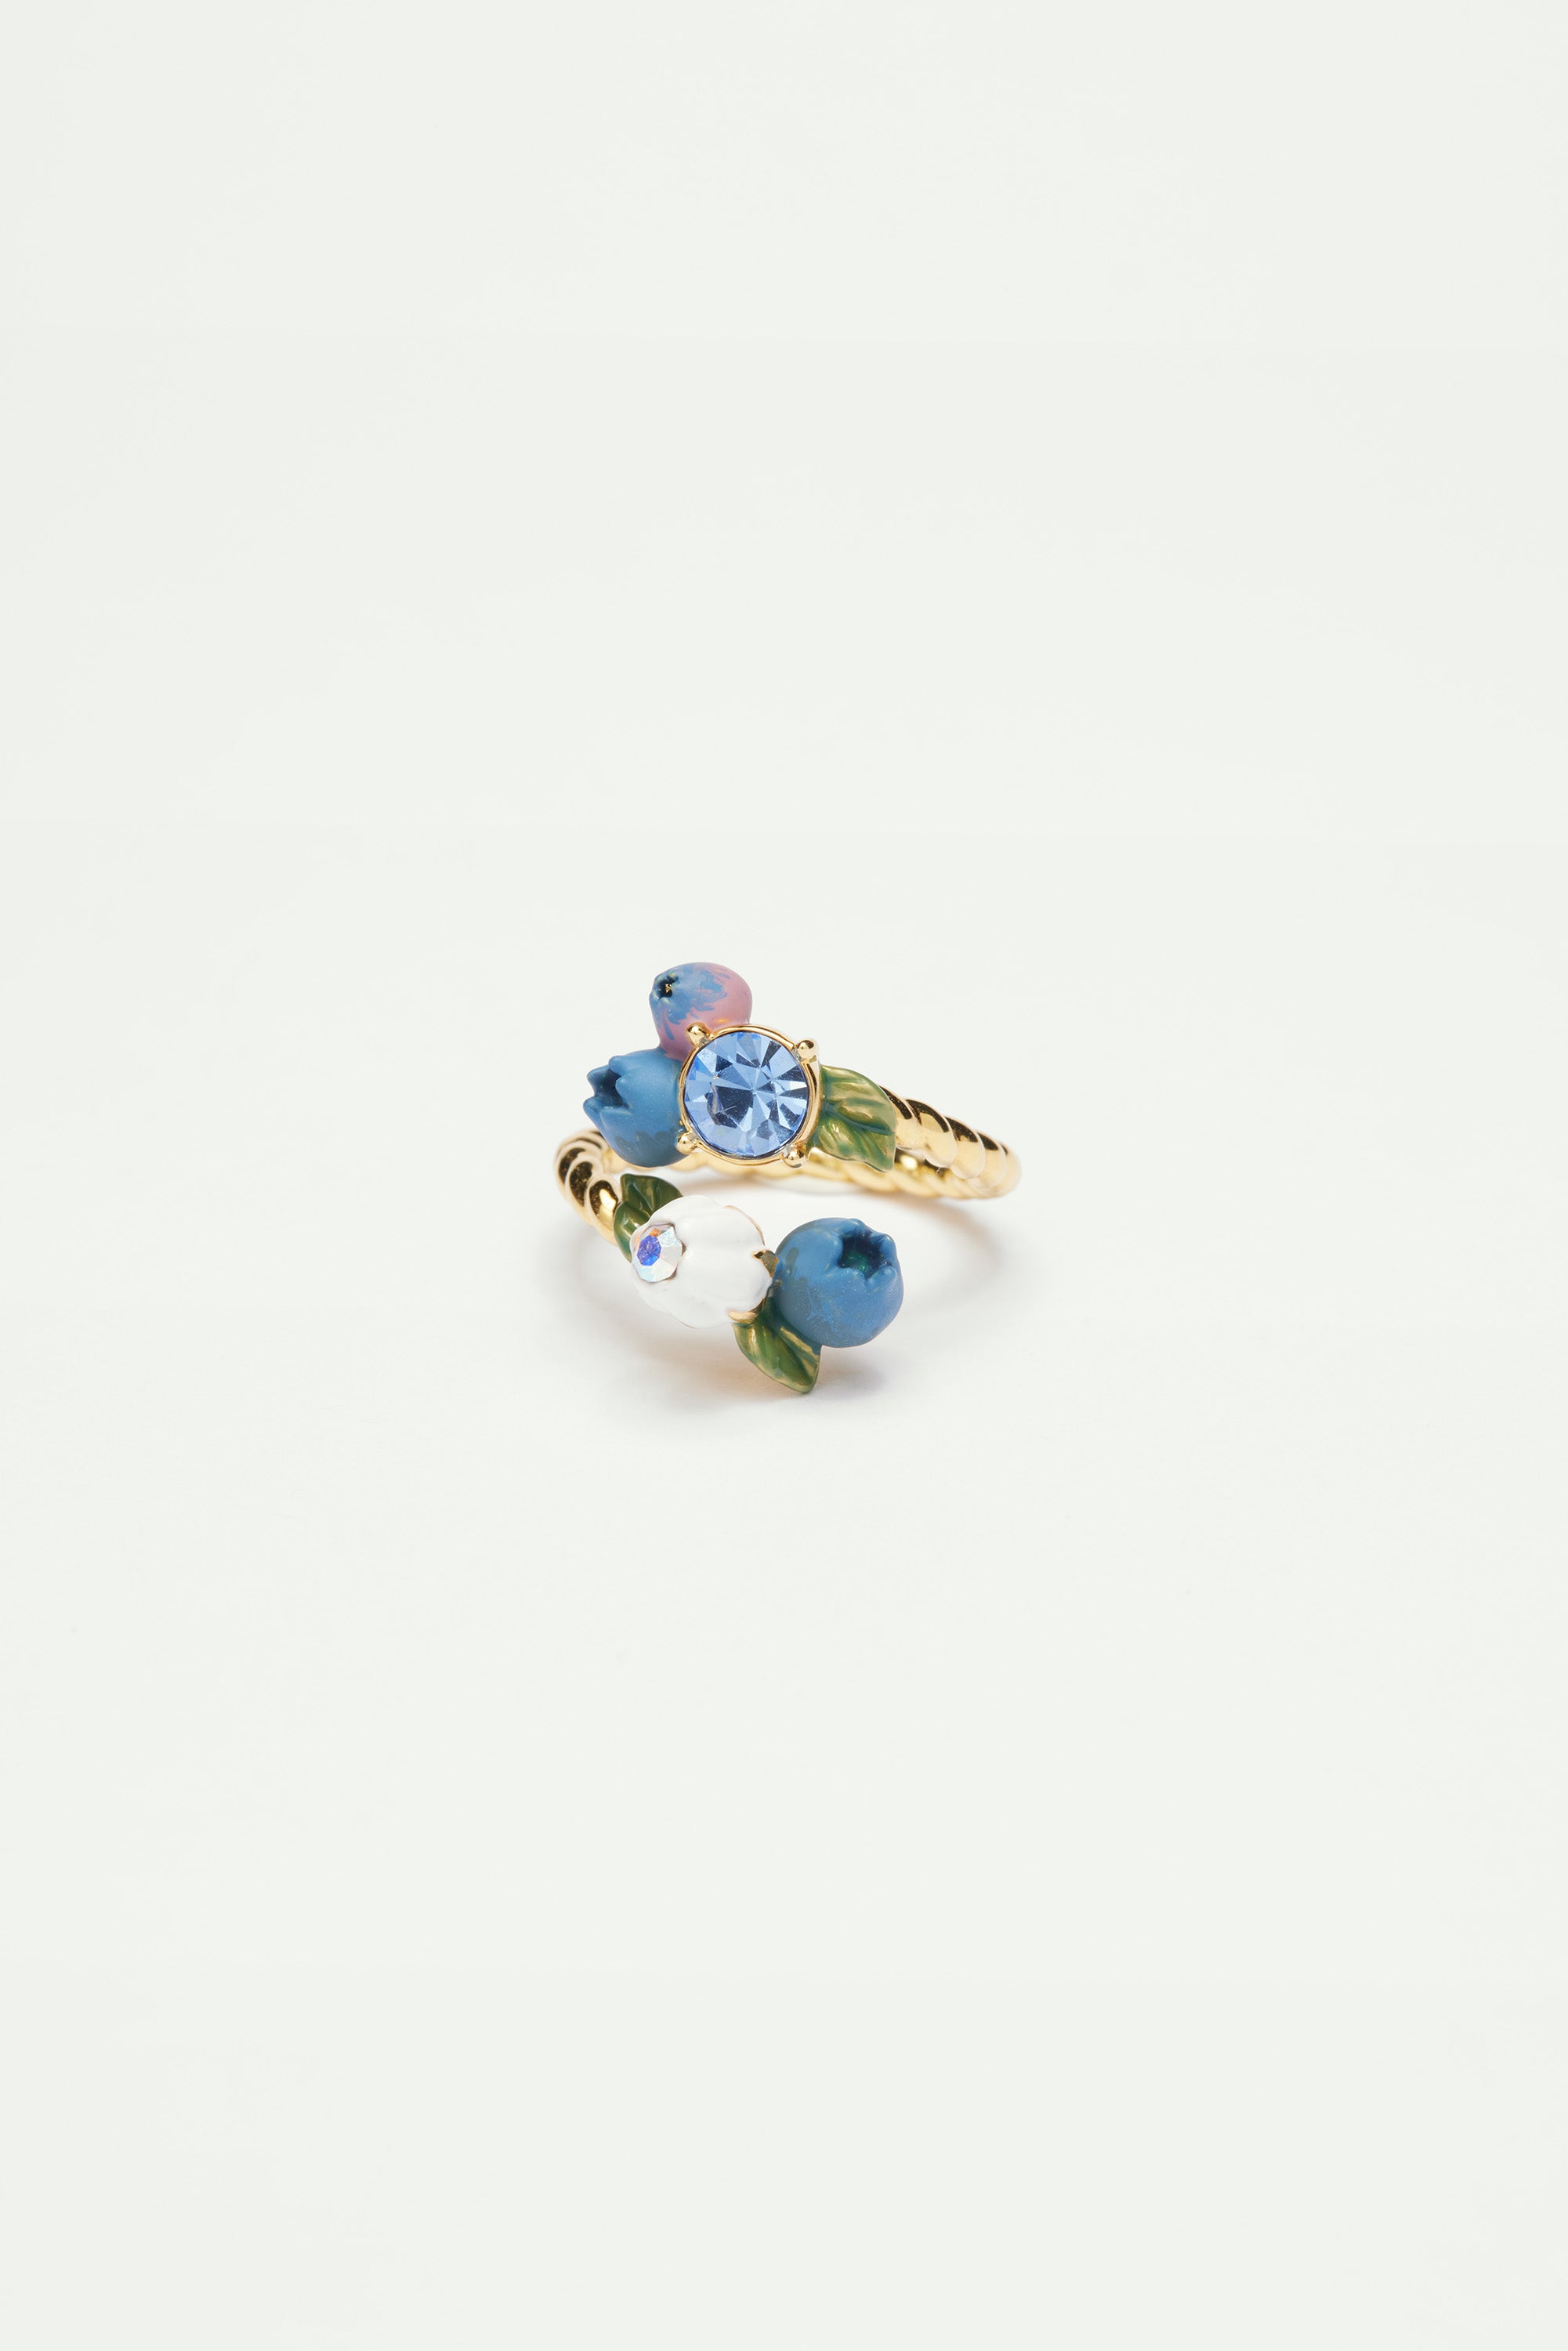 Blueberry and round stone adjustable ring